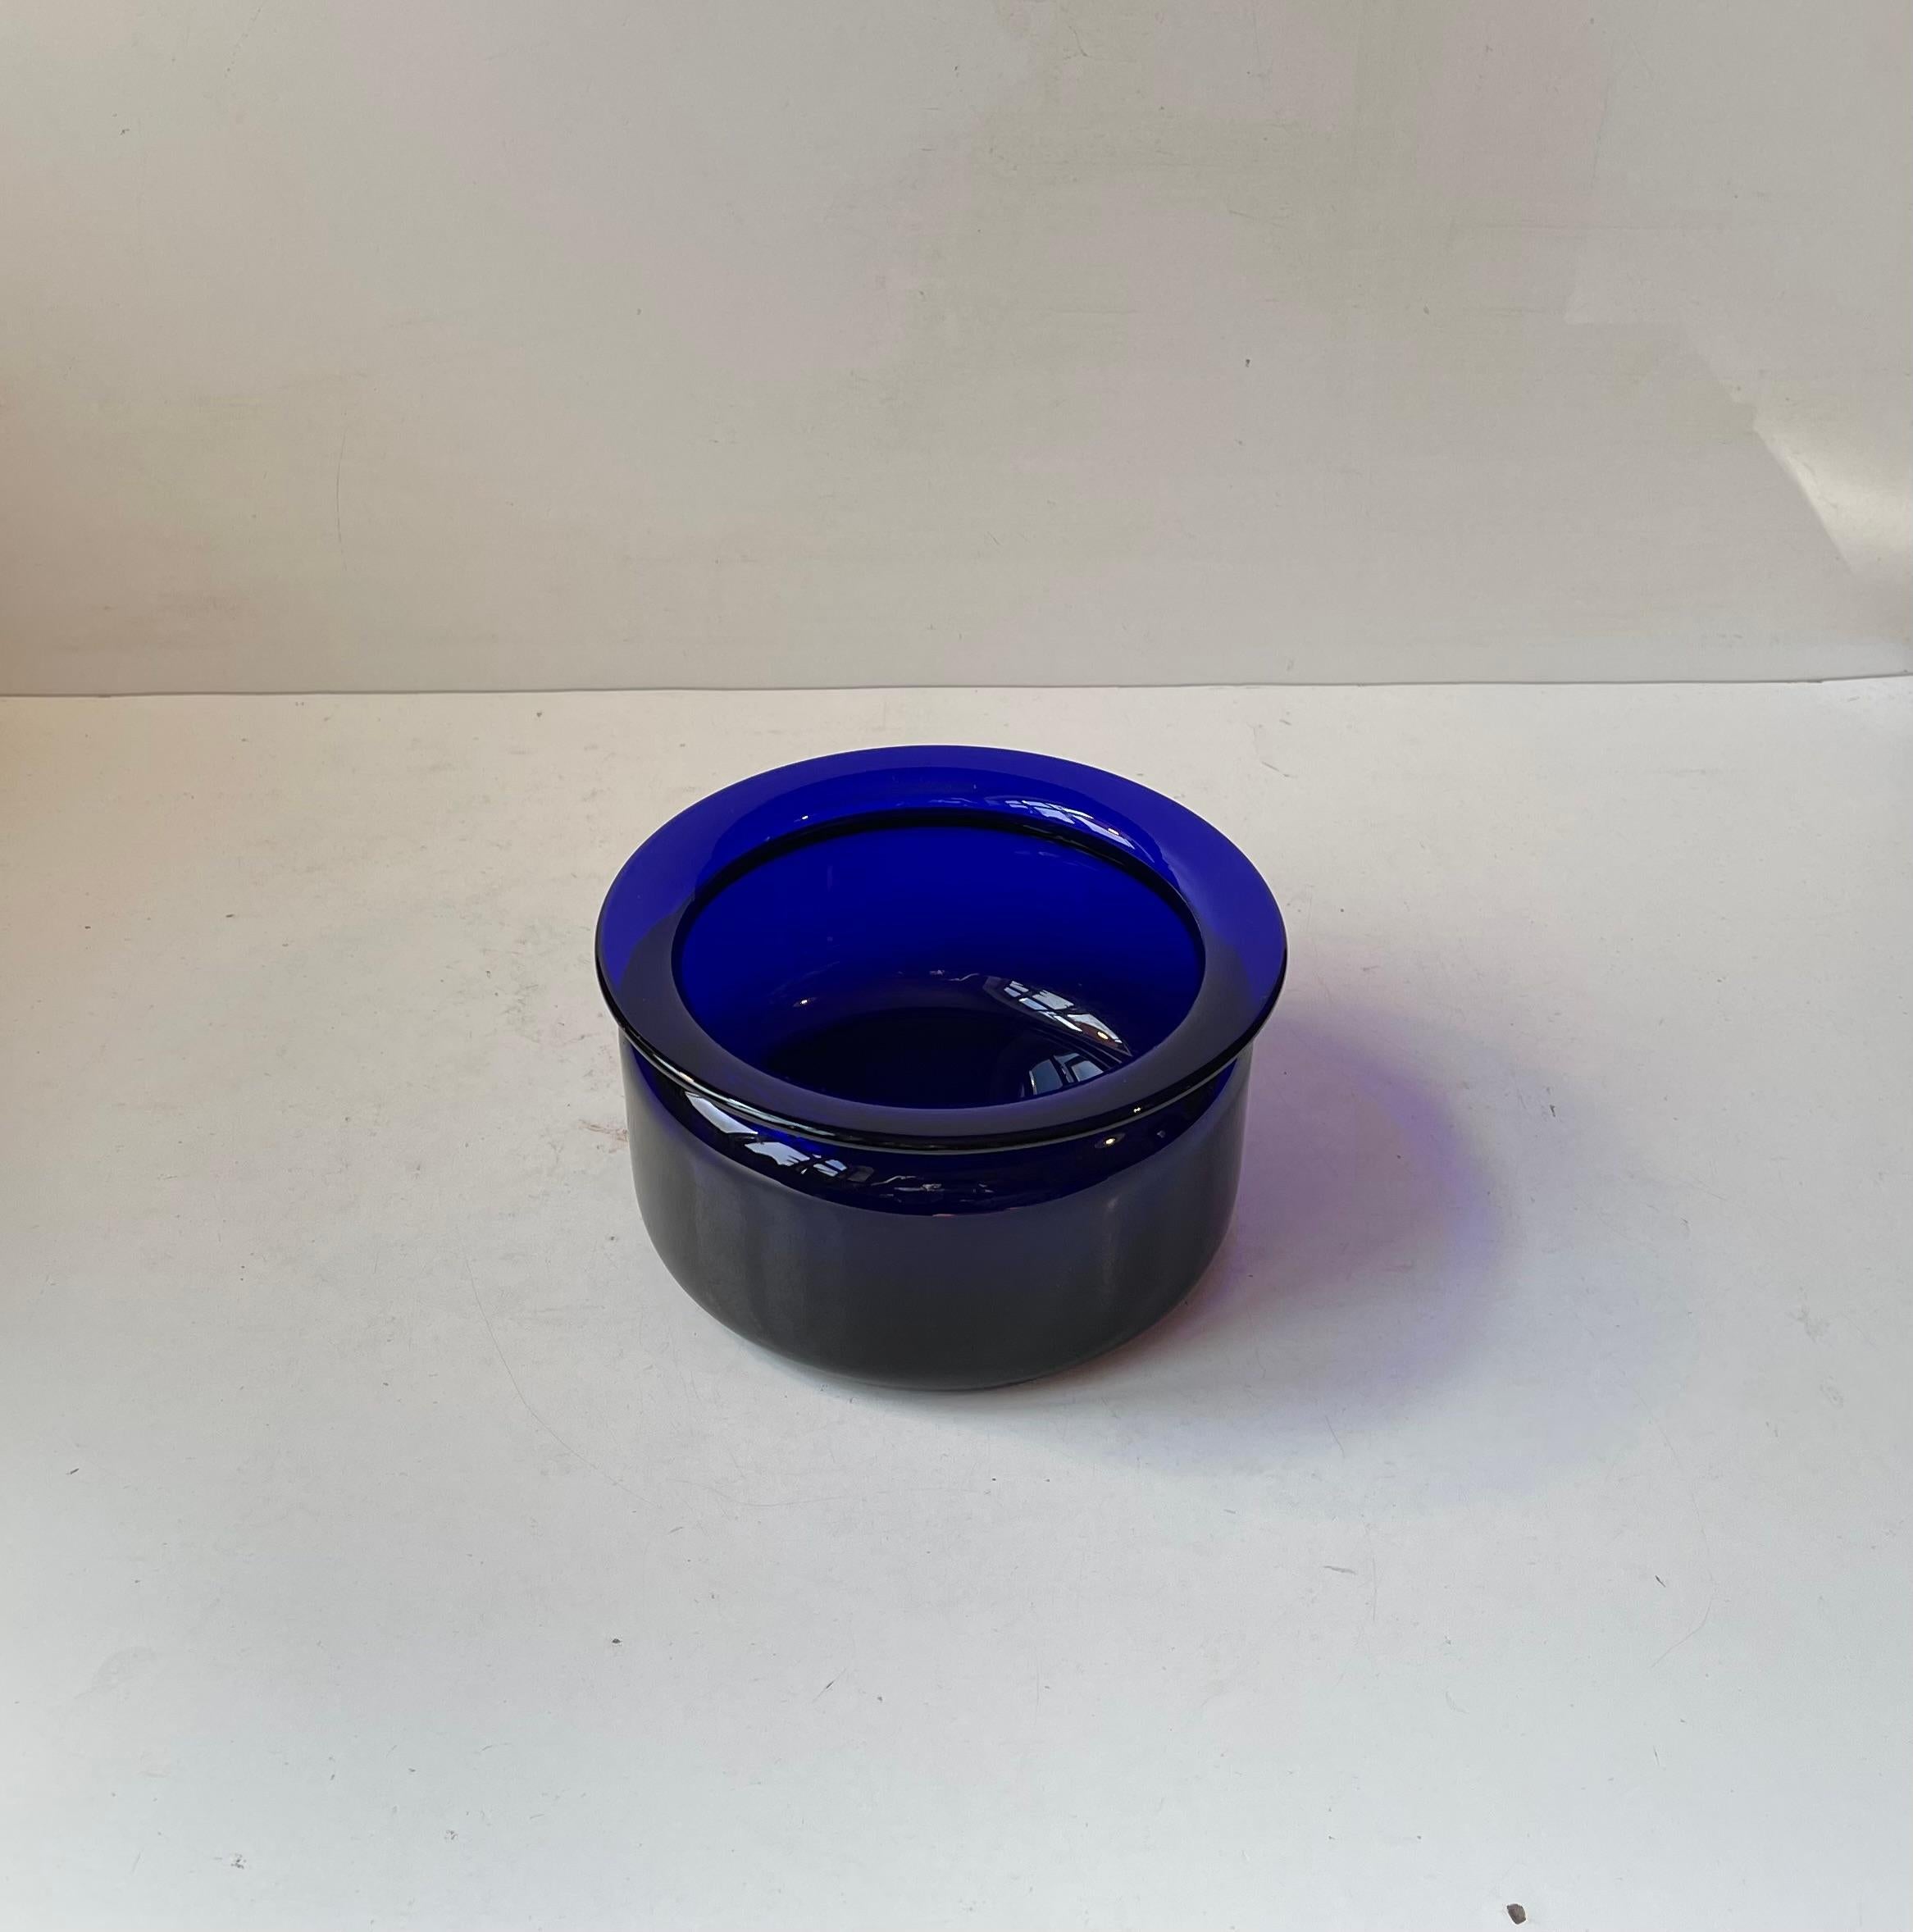 A rare salad- or decorative bowl in cobalt/saphire blue hand-blown glass. It was designed by Michael Bang and made at Holmegaard in Denmark during the 1970. Measurements: D: 17.5 cm, H: 9 cm.